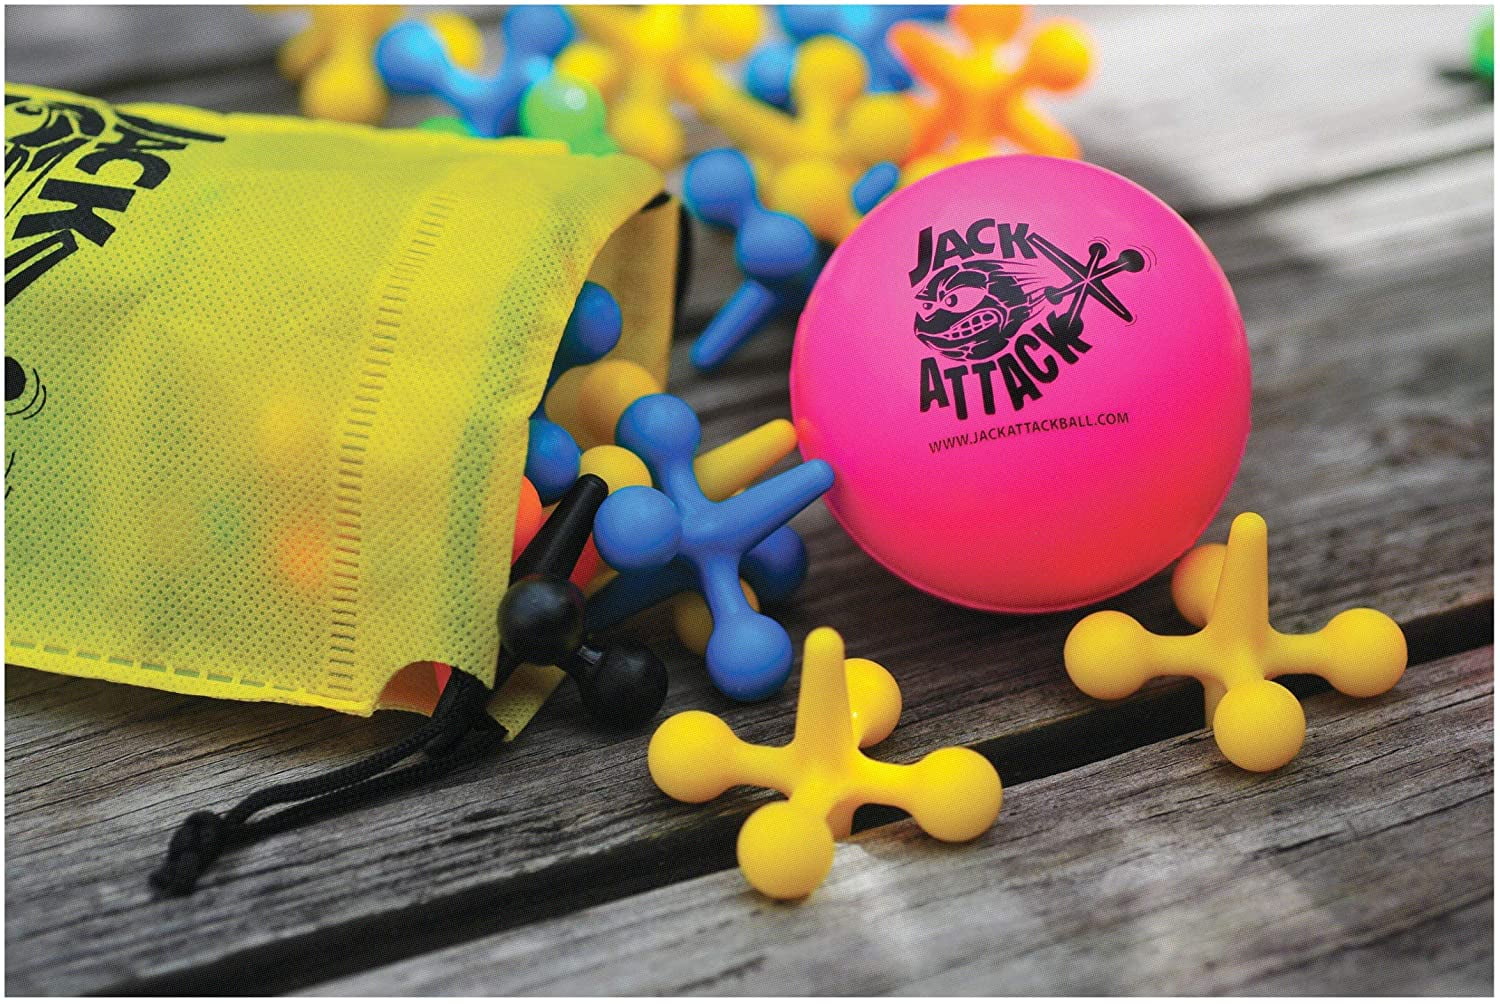 6 SETS OF NEW LARGE SIZE NEON JACKS AND RUBBER BOUNCE BALL GAME CLASSIC KIDS TOY 